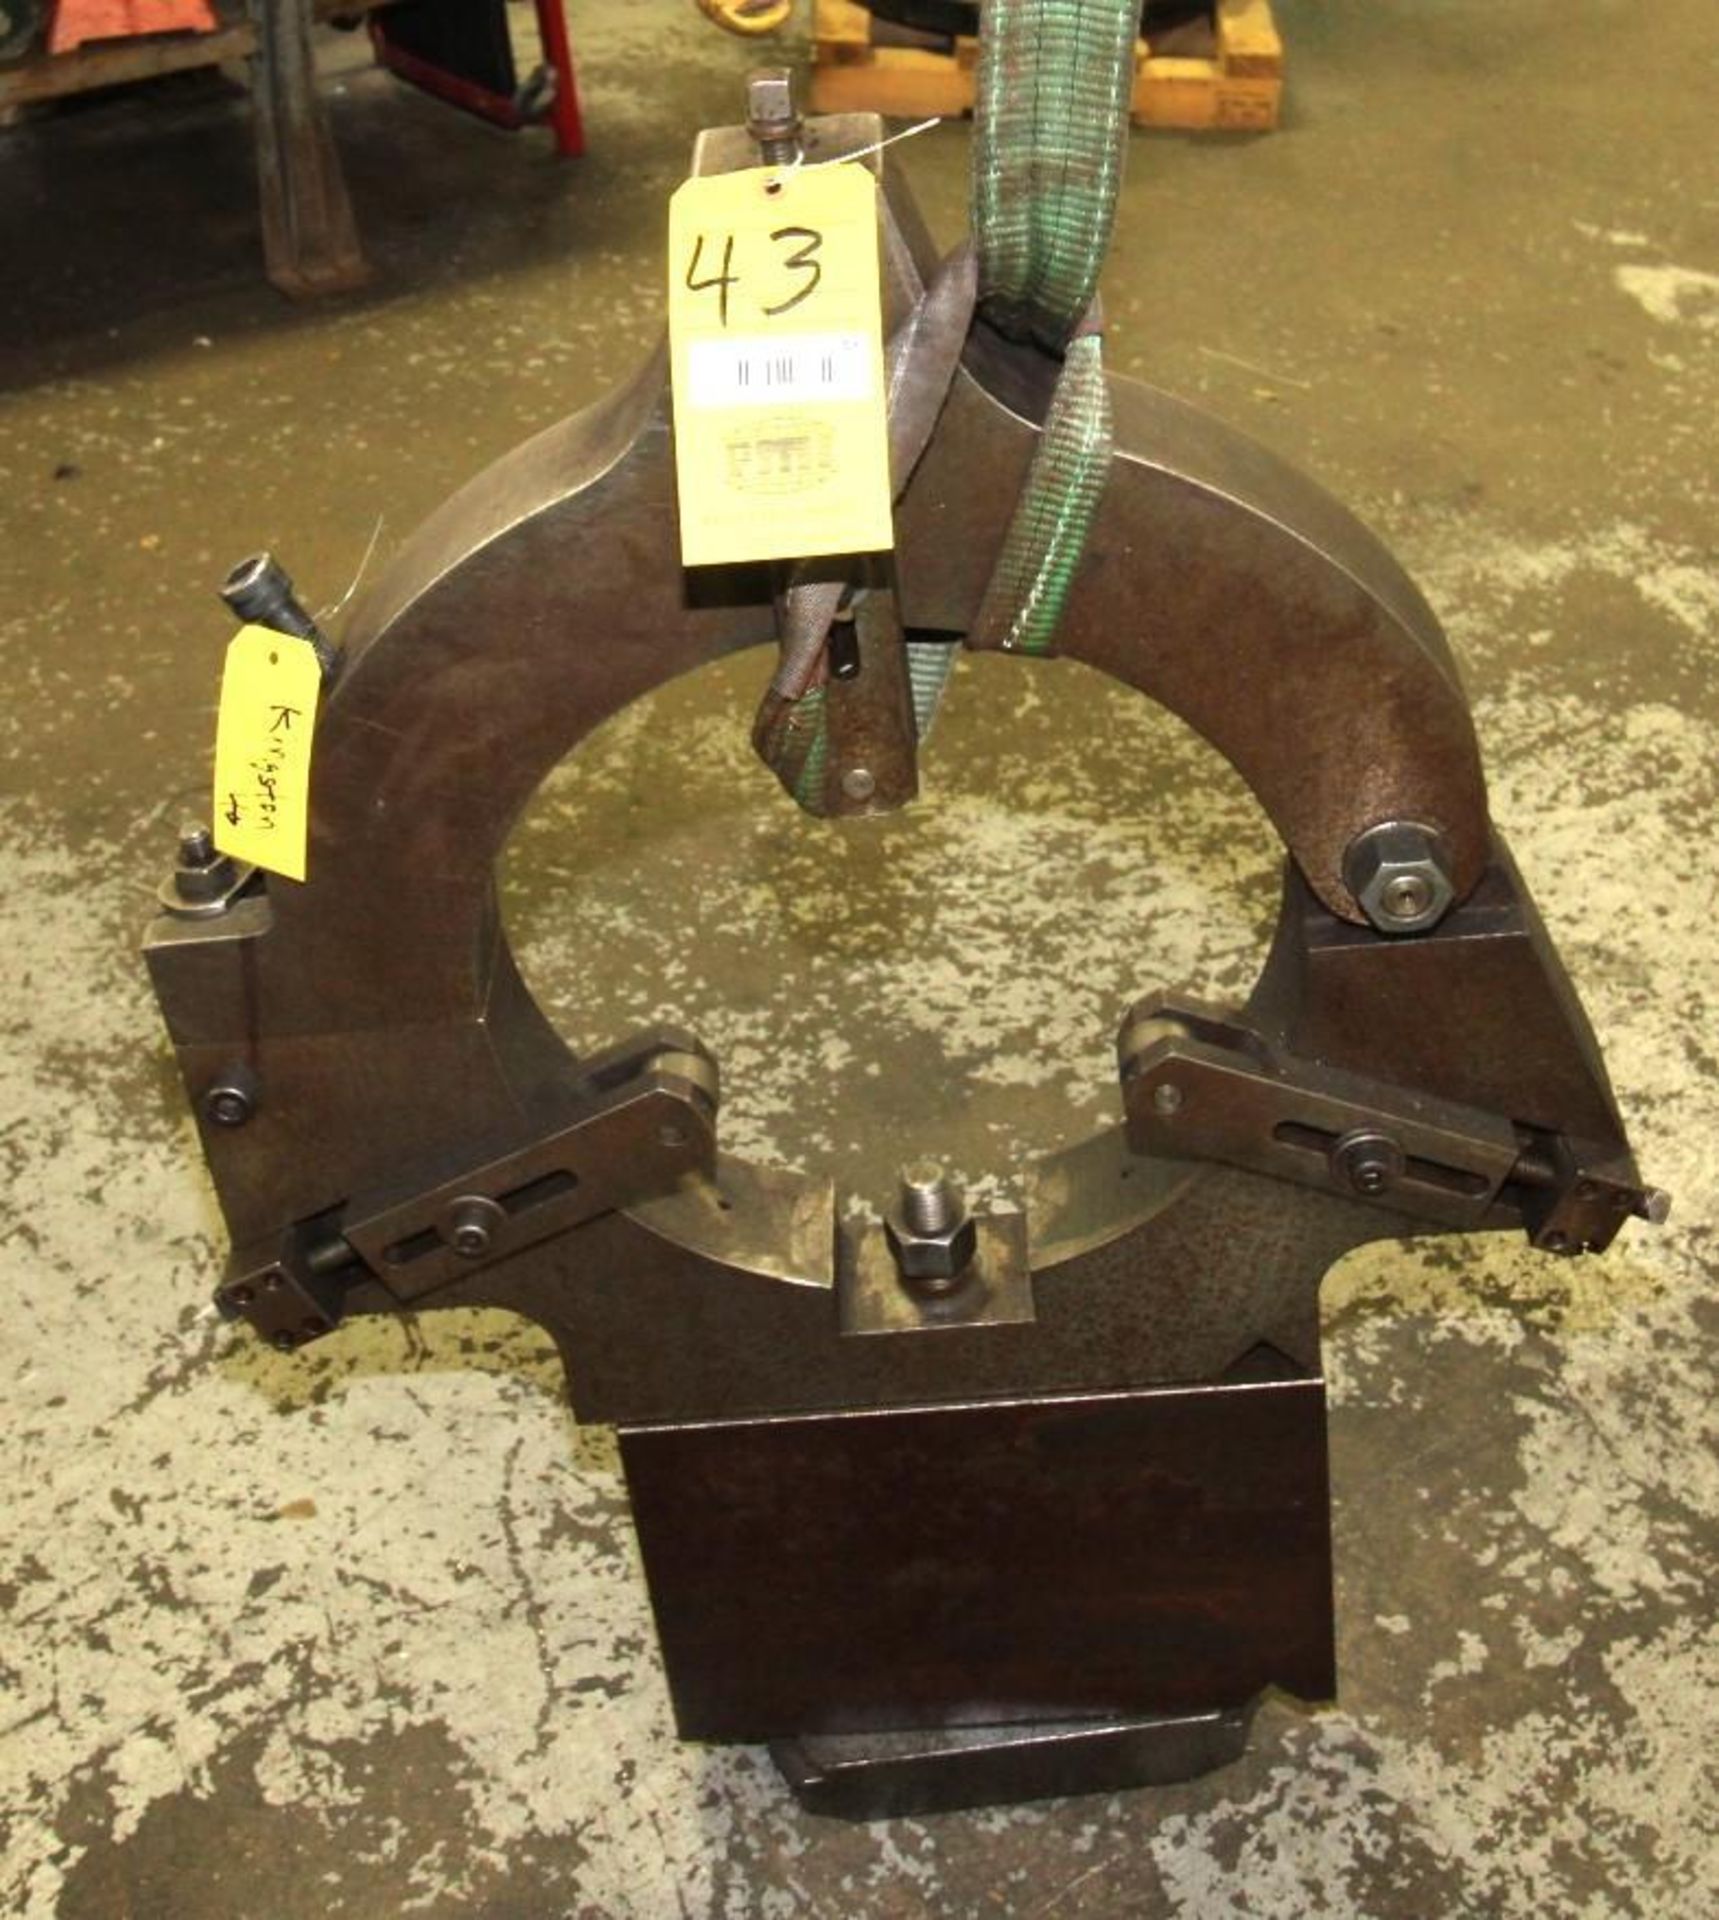 STEADYREST FOR KINGSTON MDL. HR3000, HR4000 LATHE, approx. 15" max. material dia.